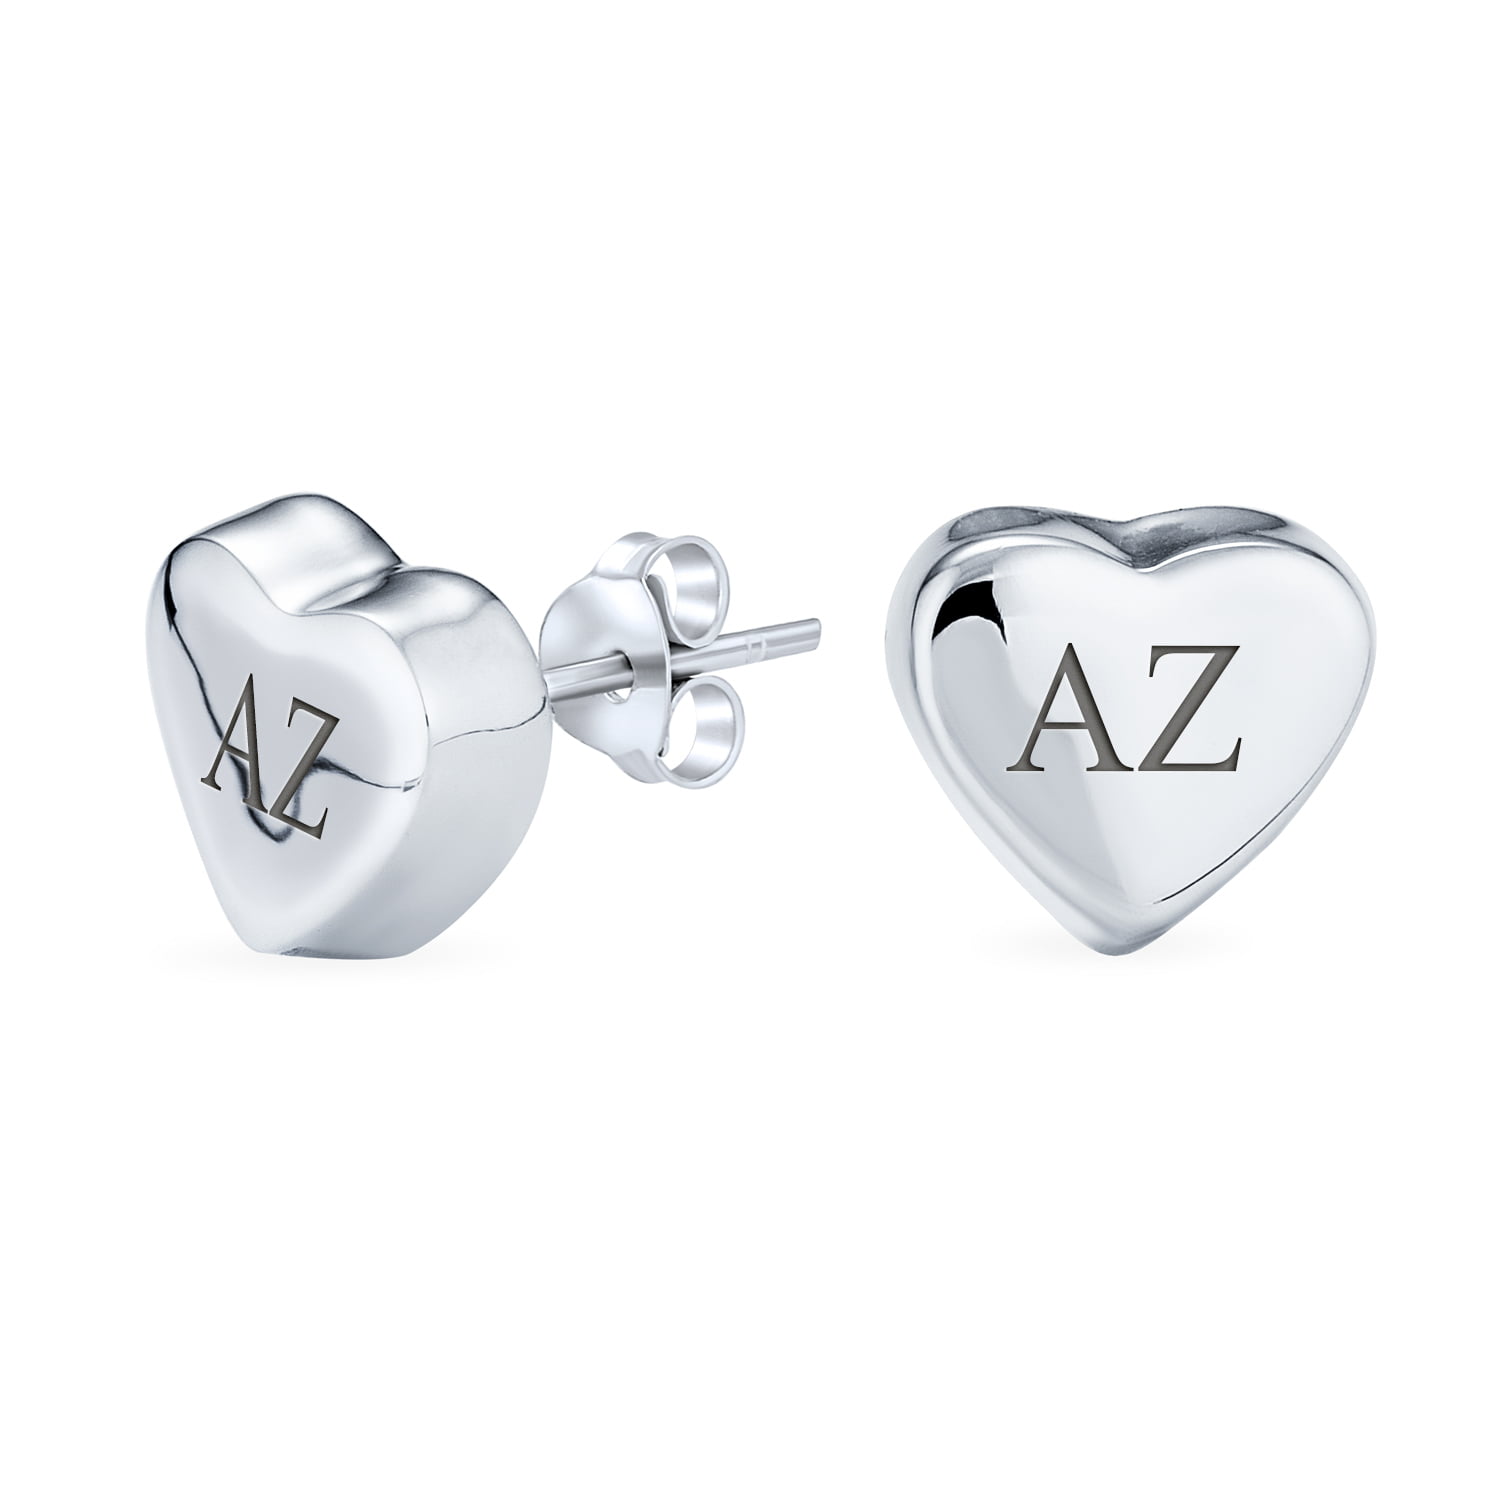 Womens .925 sterling silver Black and white heart earrings 4mm thick and 11mm wide Size 